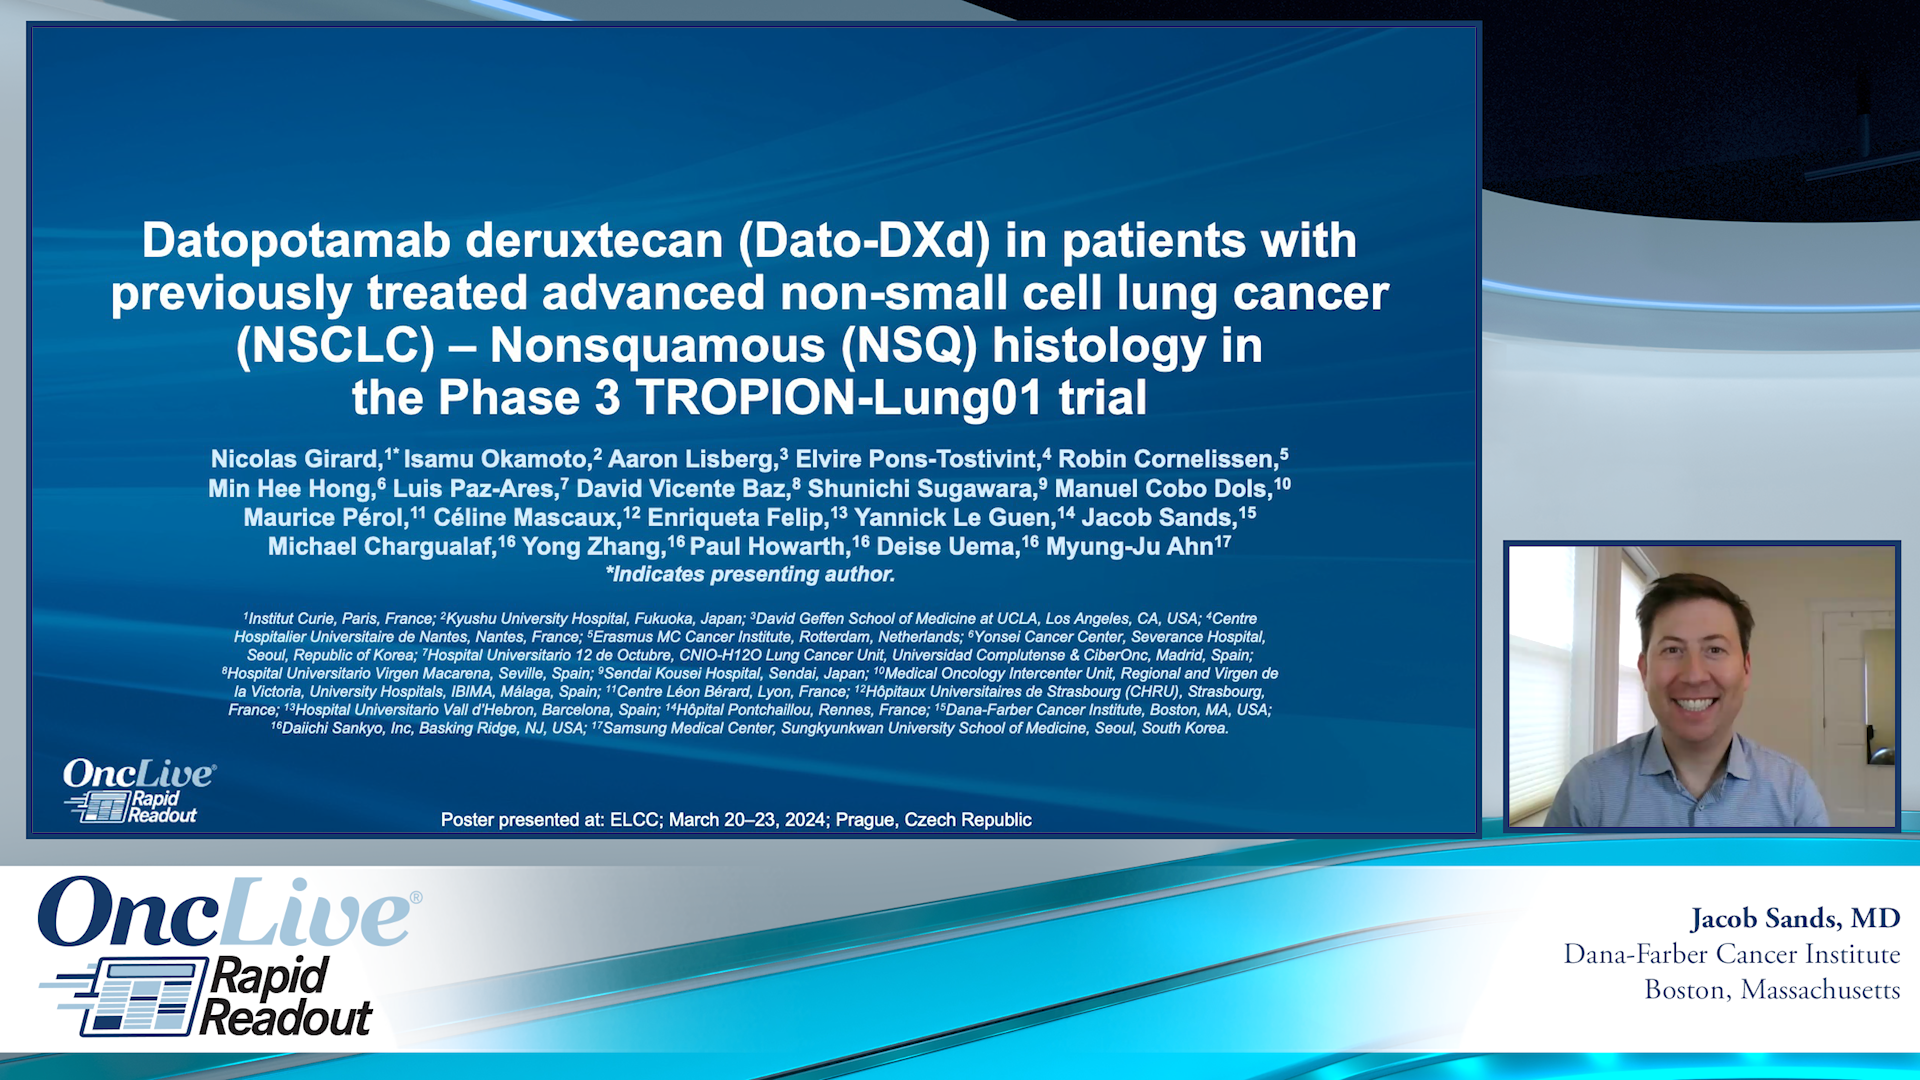 Datopotamab Deruxtecan (Dato-DXd) in Patients With Previously Treated Advanced Non-Small Cell Lung Cancer (NSCLC) – Nonsquamous (NSQ) Histology in the Phase 3 TROPION-Lung01 Trial